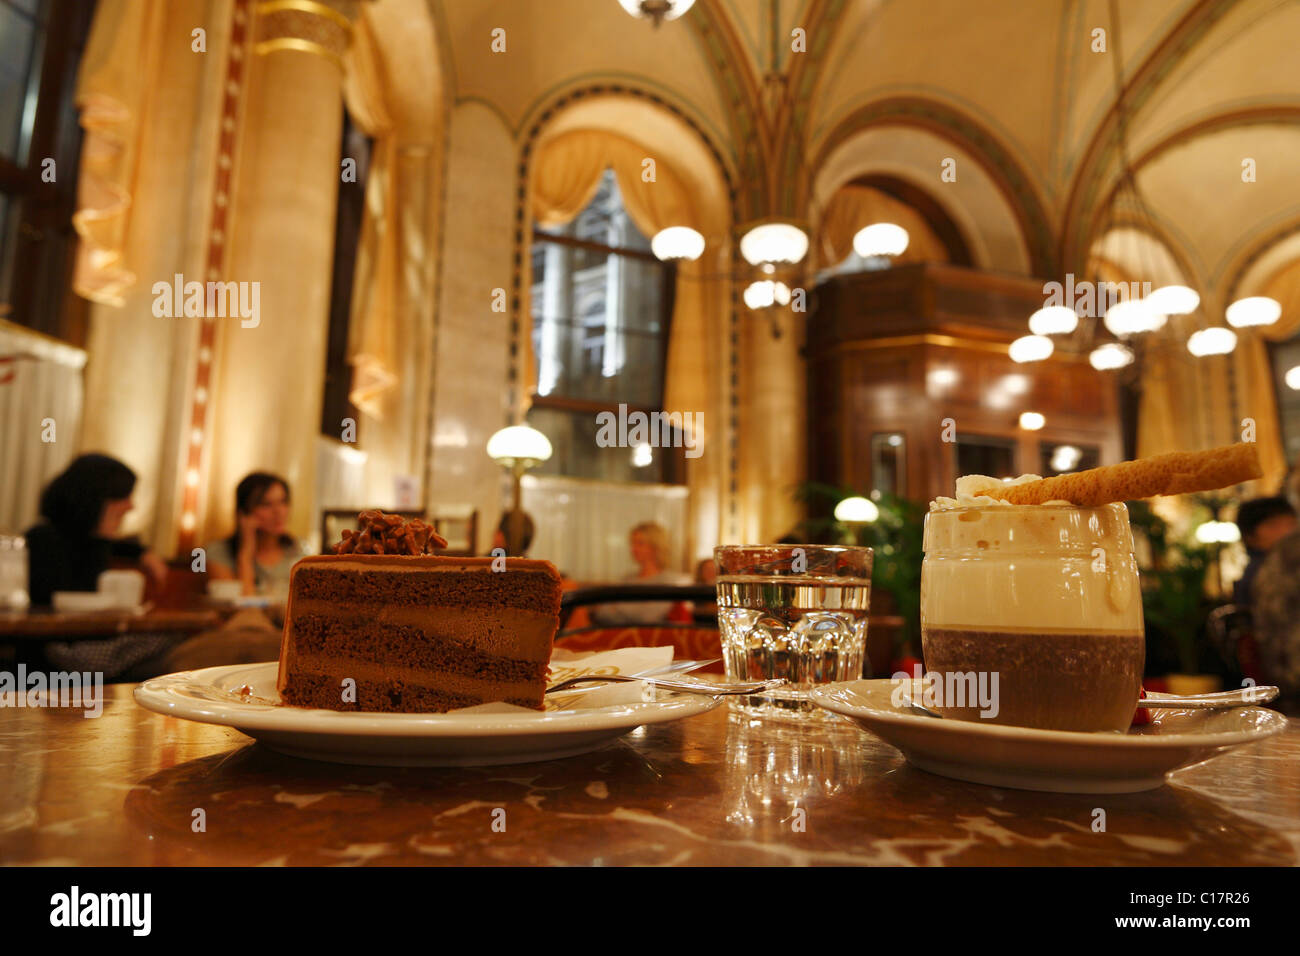 Nougat-Torte, nougat gateau and Einspaenner, mocca with whipped cream, coffee speciality in Café Central, Palais Ferstel, Vienna Stock Photo